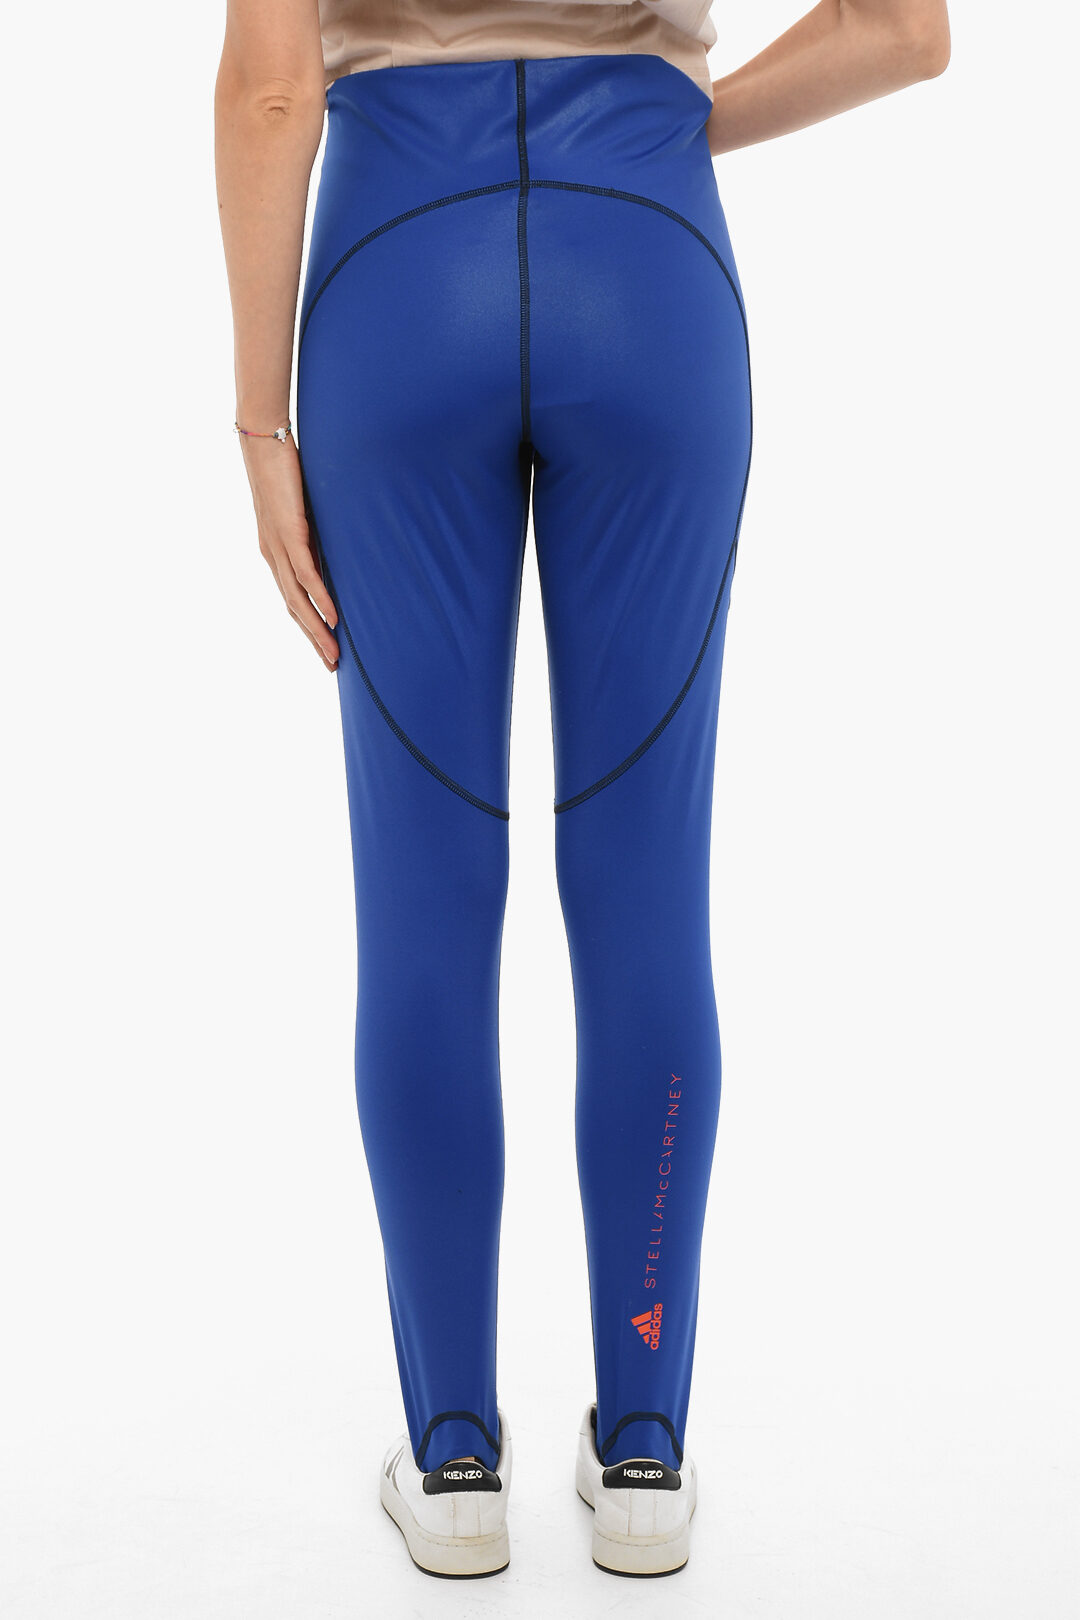 alleen vrije tijd Beperkingen Adidas STELLA MCCARTNEY Stretch Fabric Leggings with Visible Stitching and  Heel Cut-out Detail women - Glamood Outlet